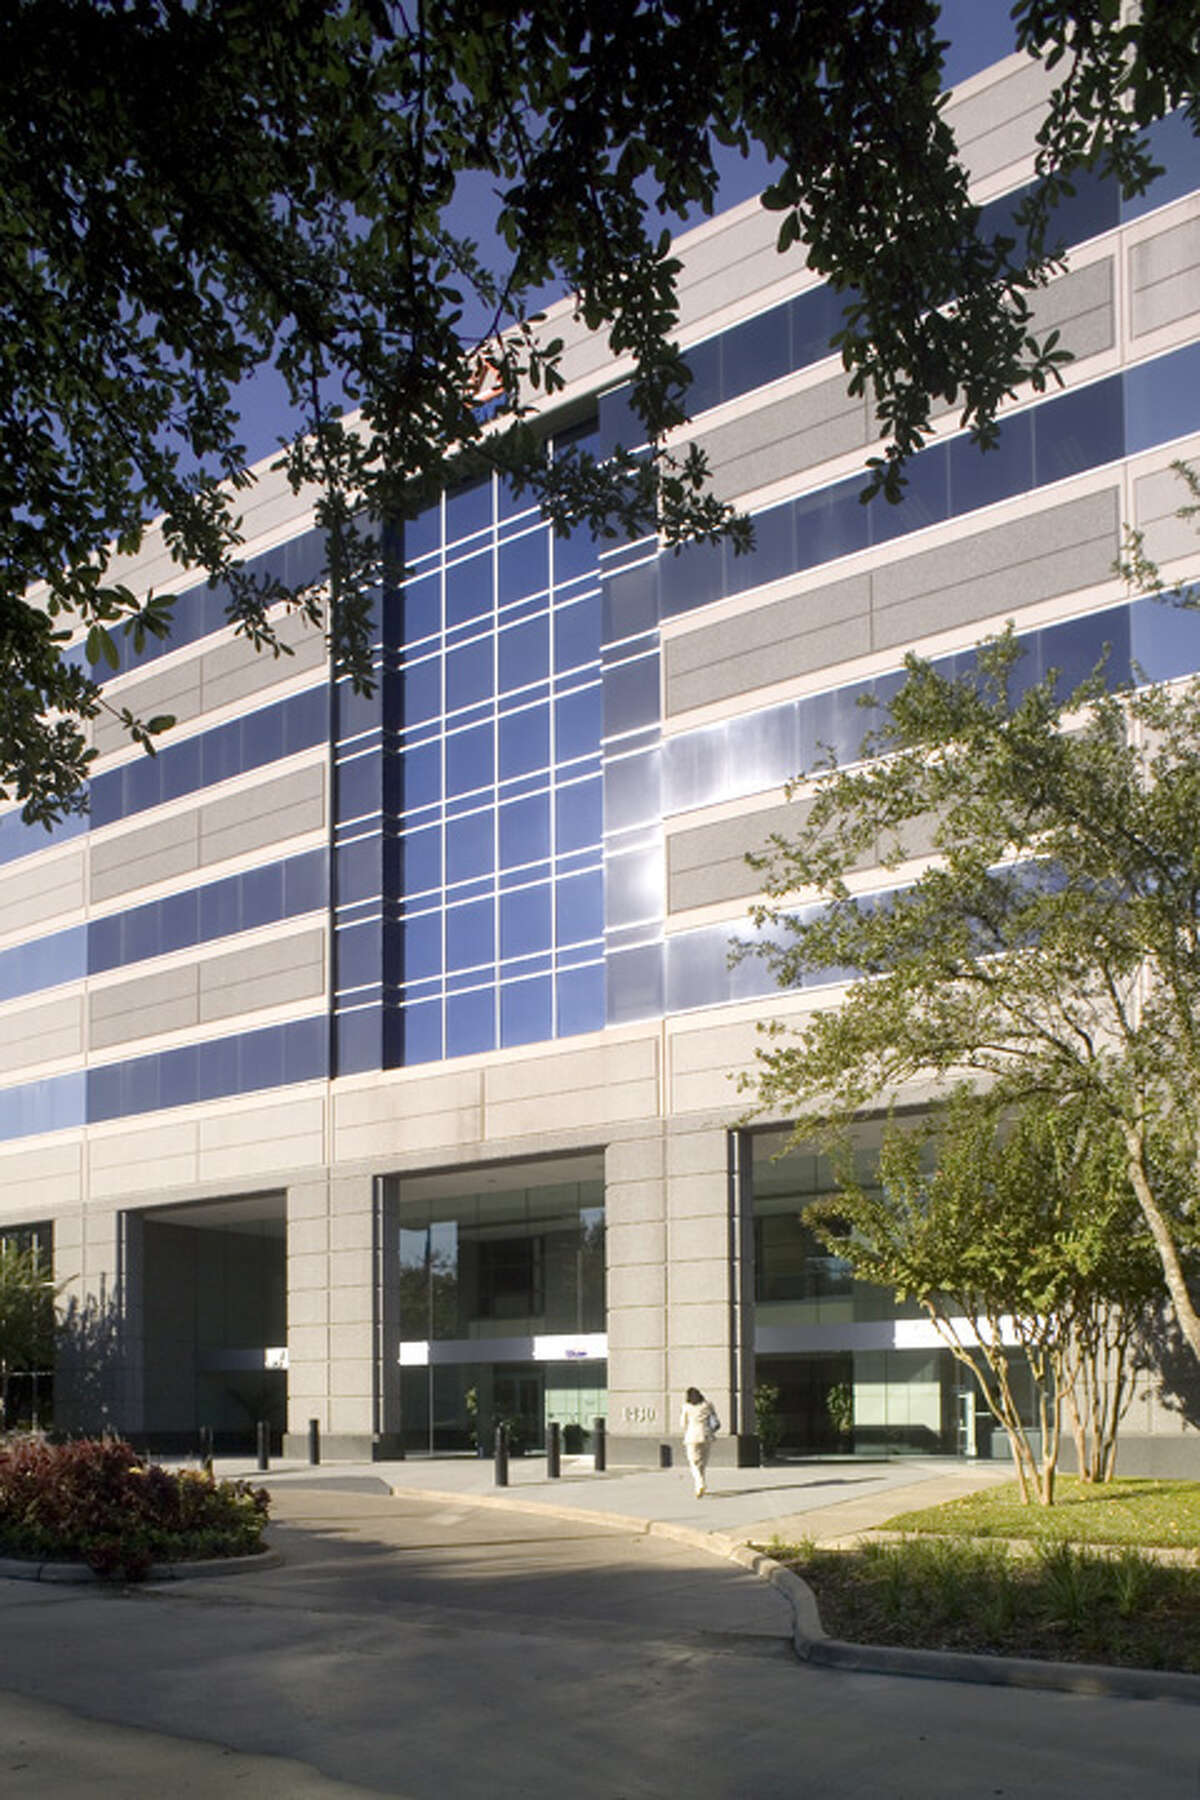 Transwestern's Houston office announced that it negotiated a 312,564-square-foot lease renewal and expansion at 1430 Enclave Parkway, Houston, Texas between Piedmont Office Realty Trust and the Shaw Group. Photo is from Transwestern